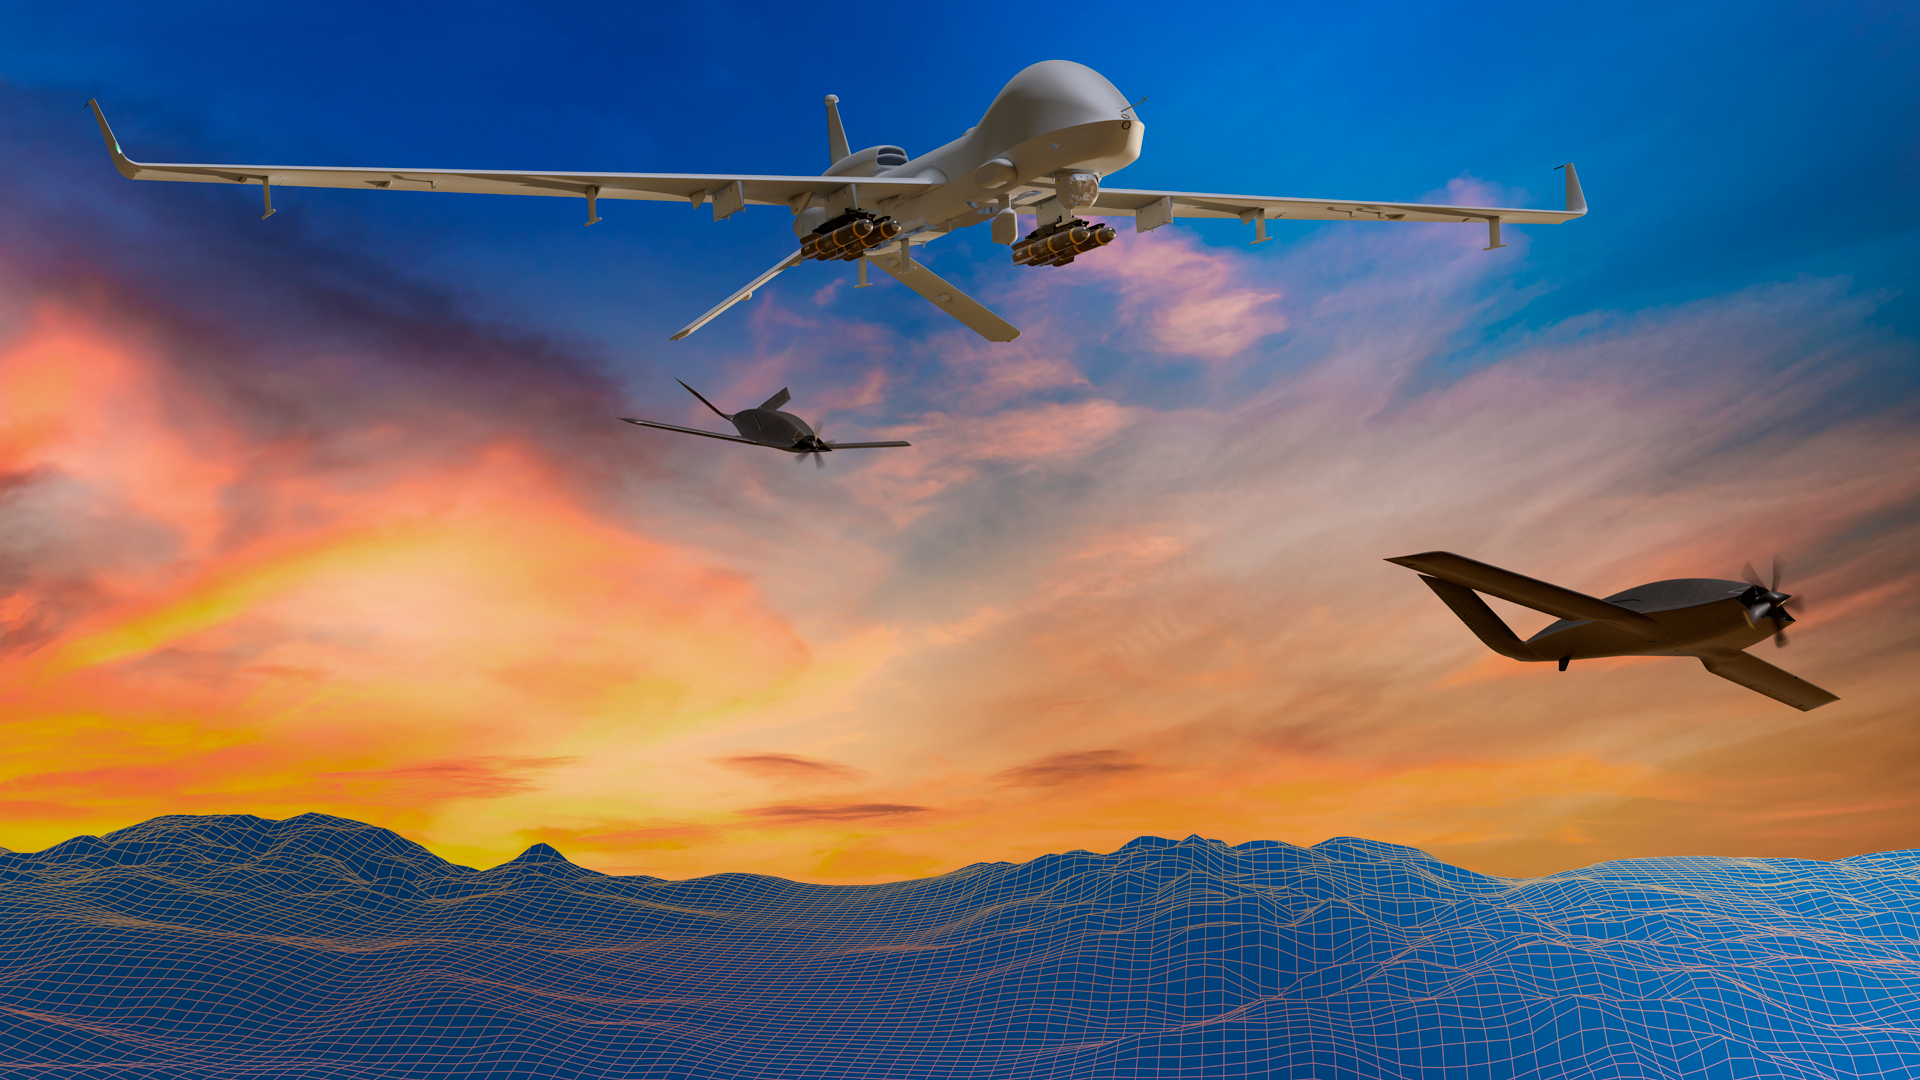 Powerful new upgrades make new Gray Eagle 25M the most capable Army UAS ever